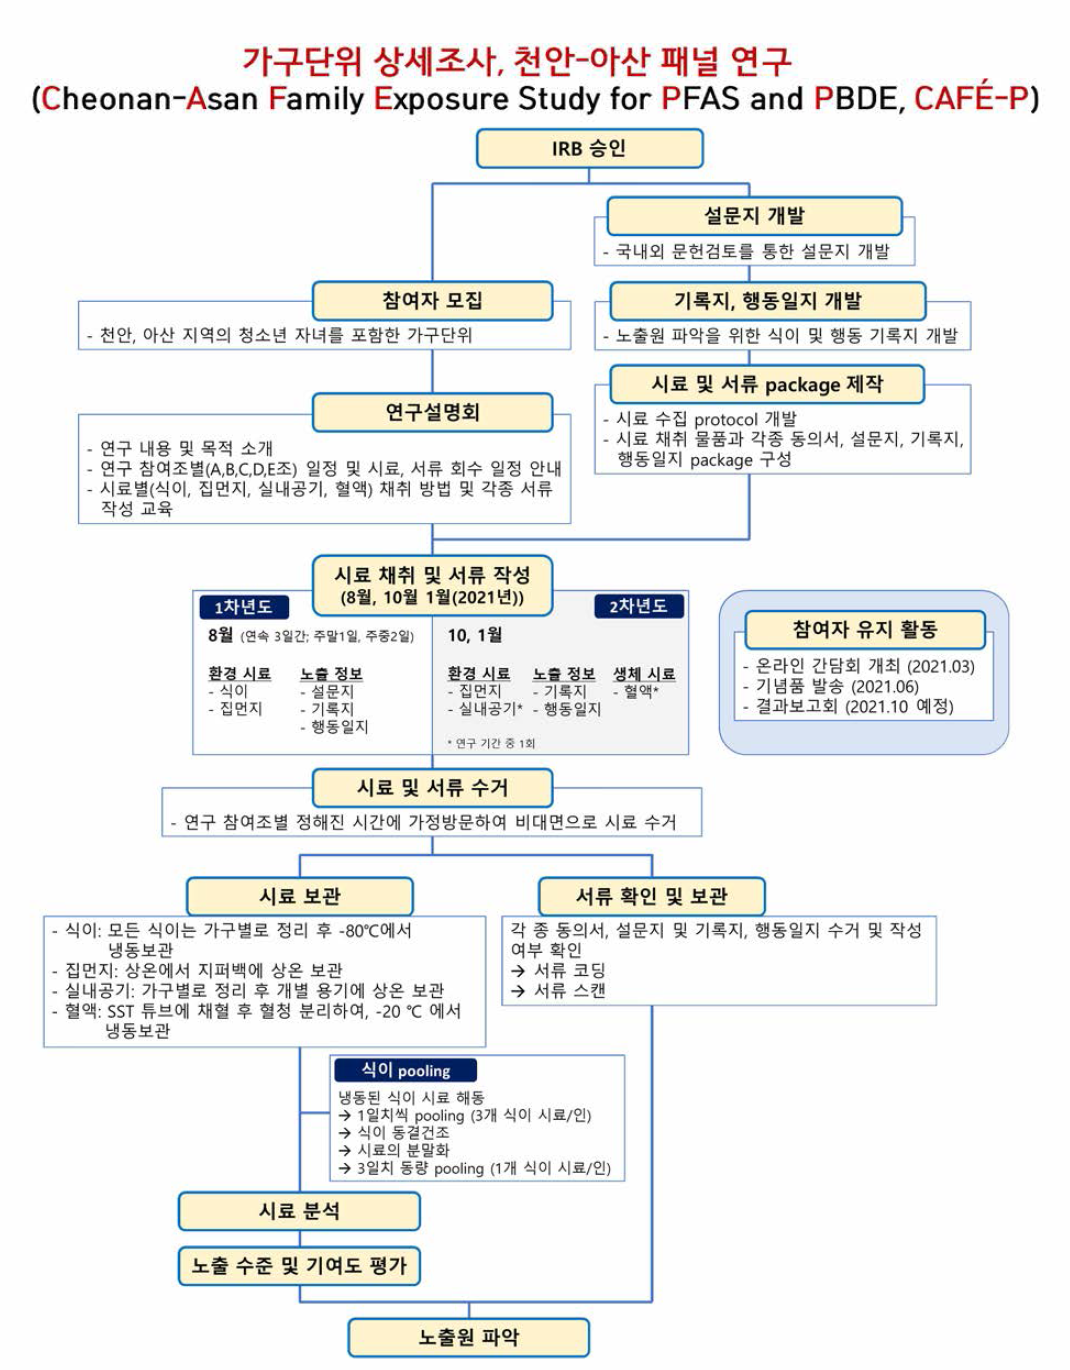 CAFE-Ps 진행 flow chart